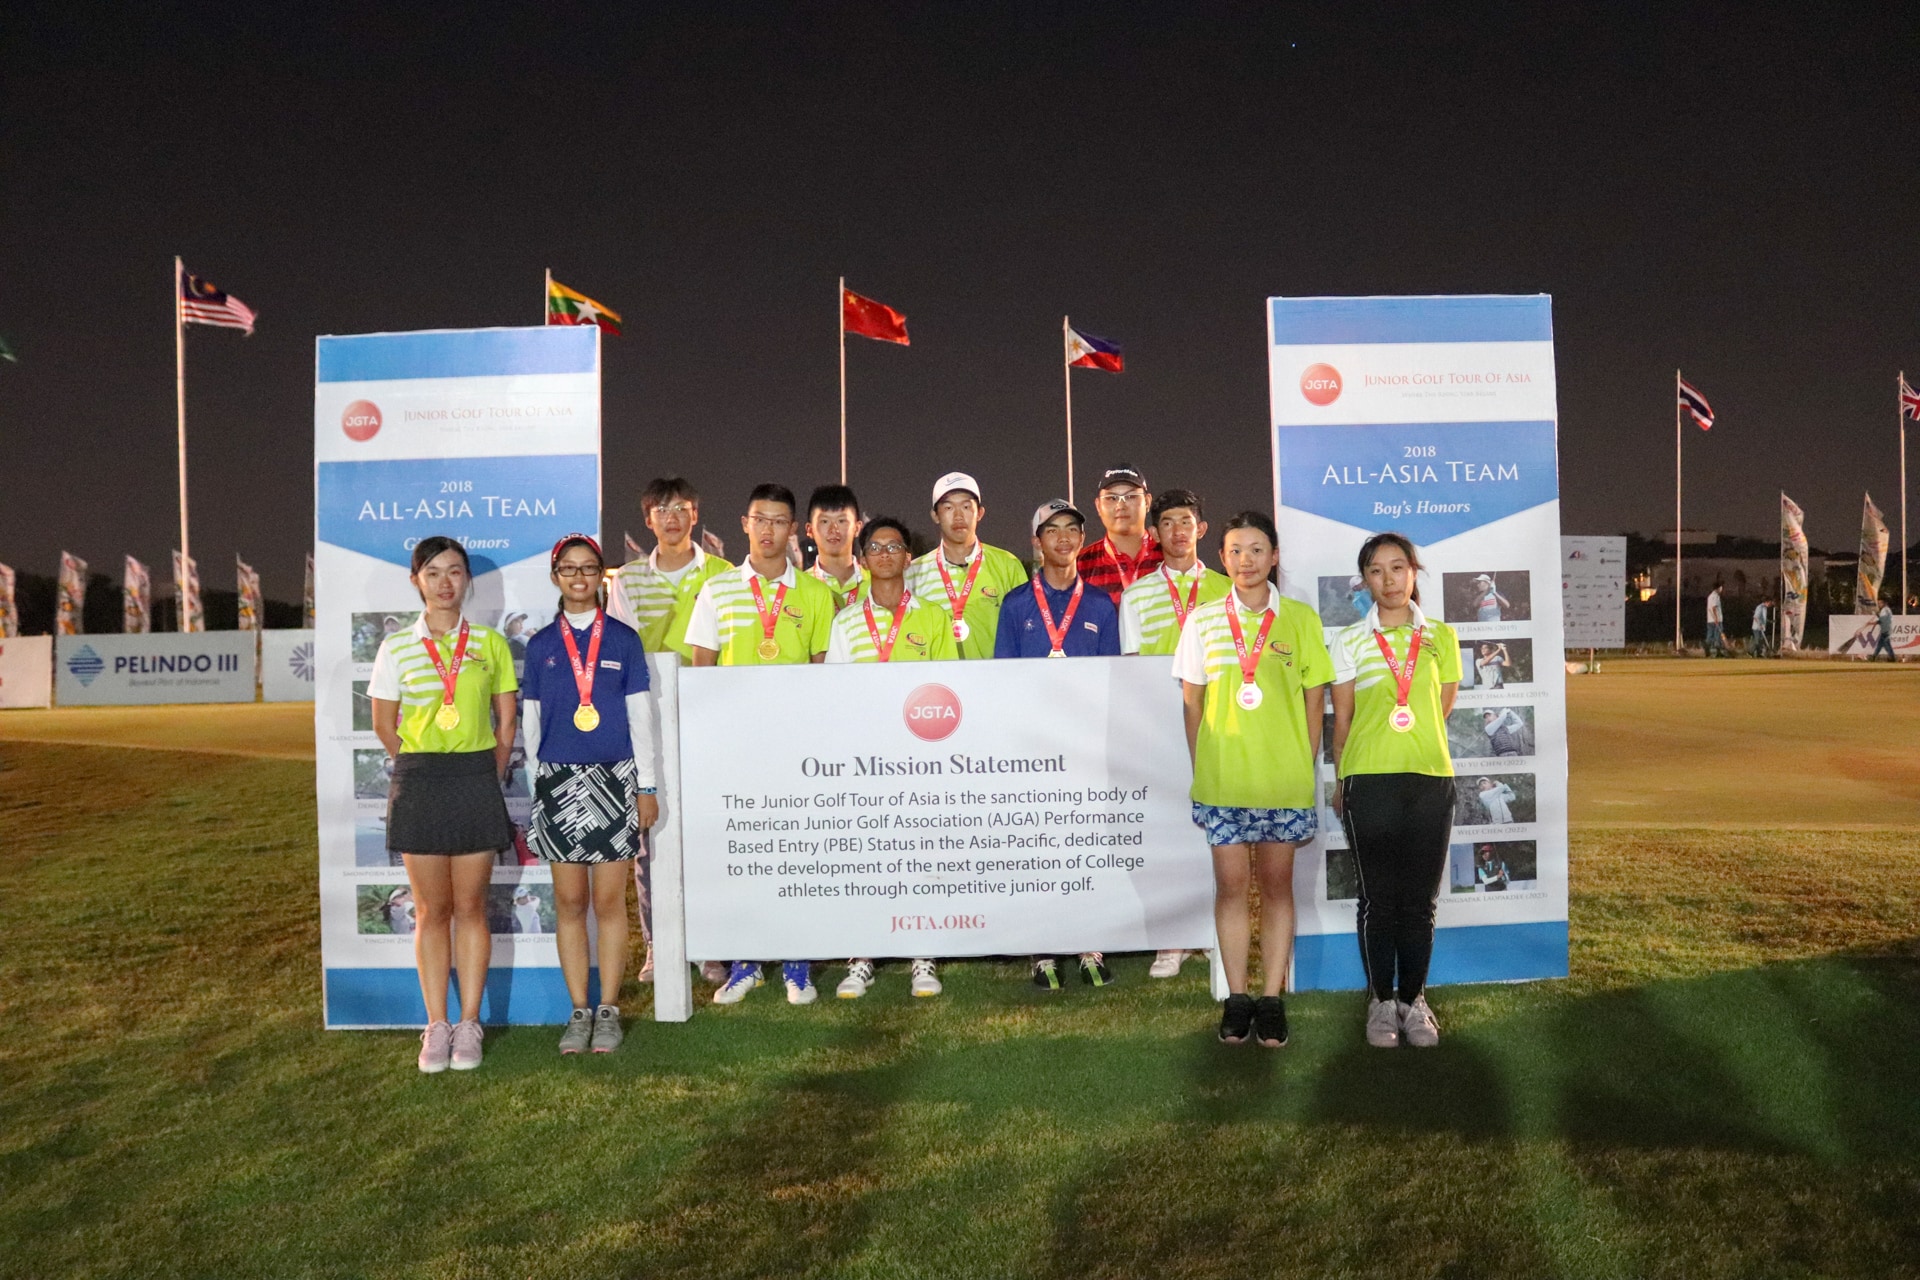 Boys and Girls from the 2019 Junior All-Asia Team